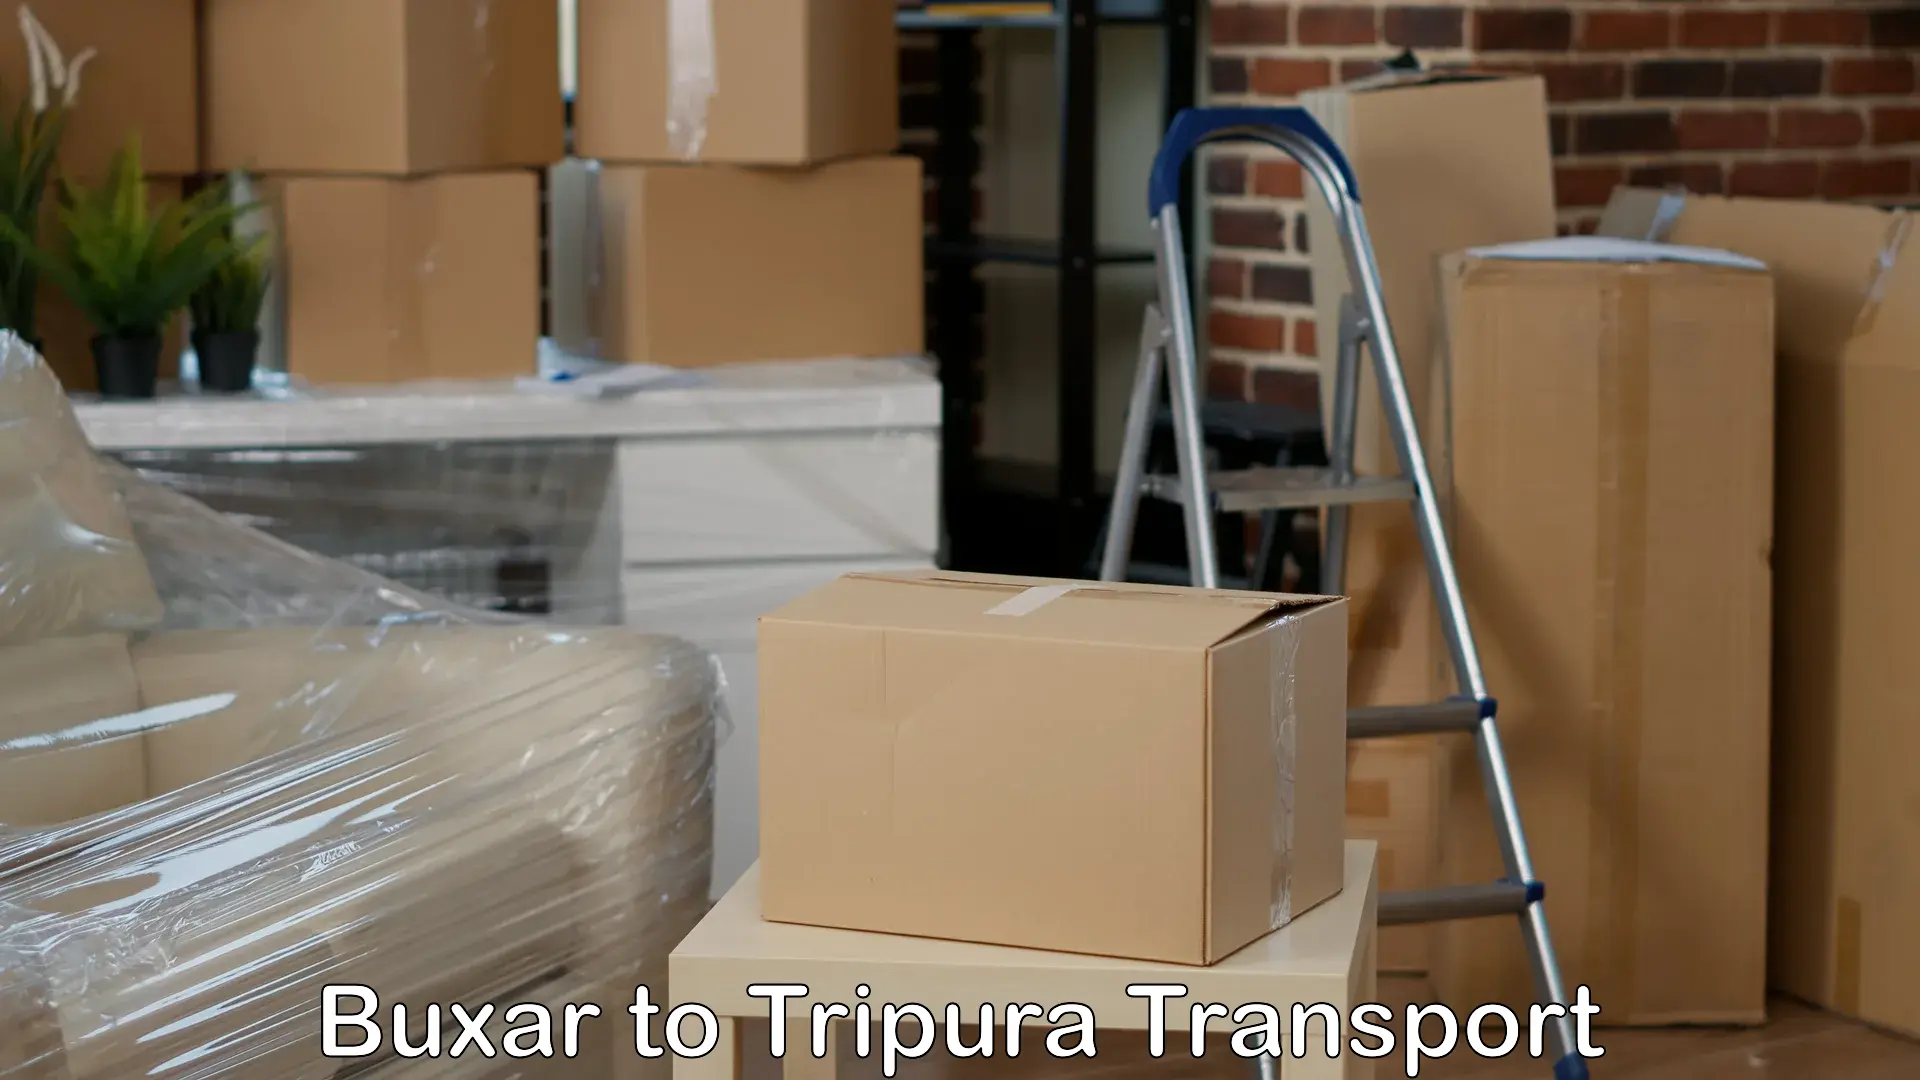 Luggage transport services Buxar to Amarpur